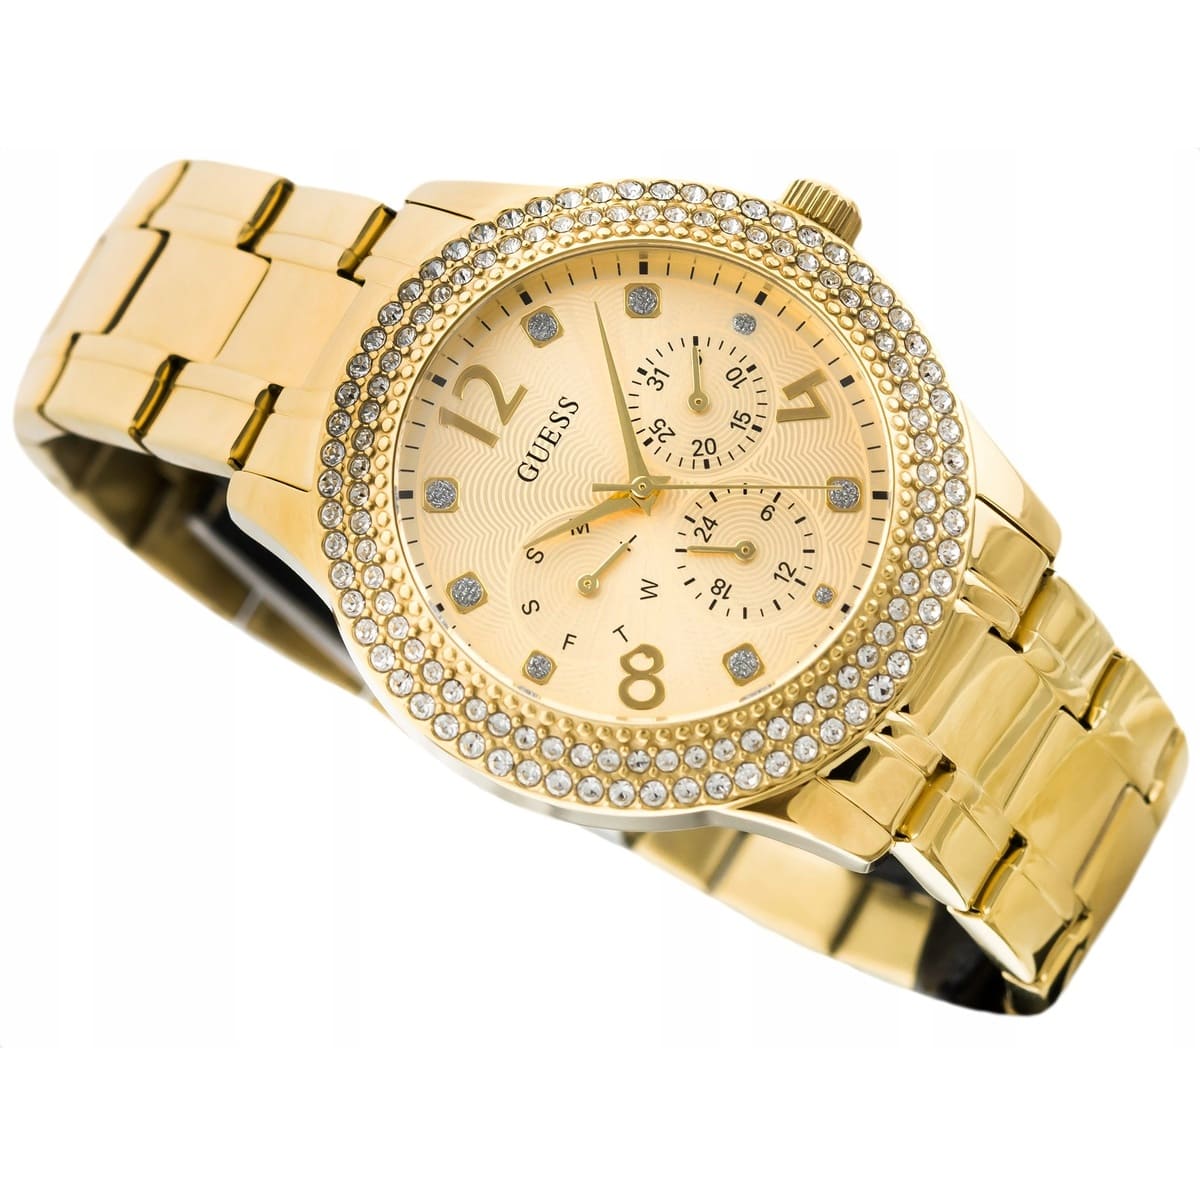 GUESS LADIES GOLD TONE CASE GOLD TONE STAINLESS STEEL WATCH U1097L2 - image 3 of 4